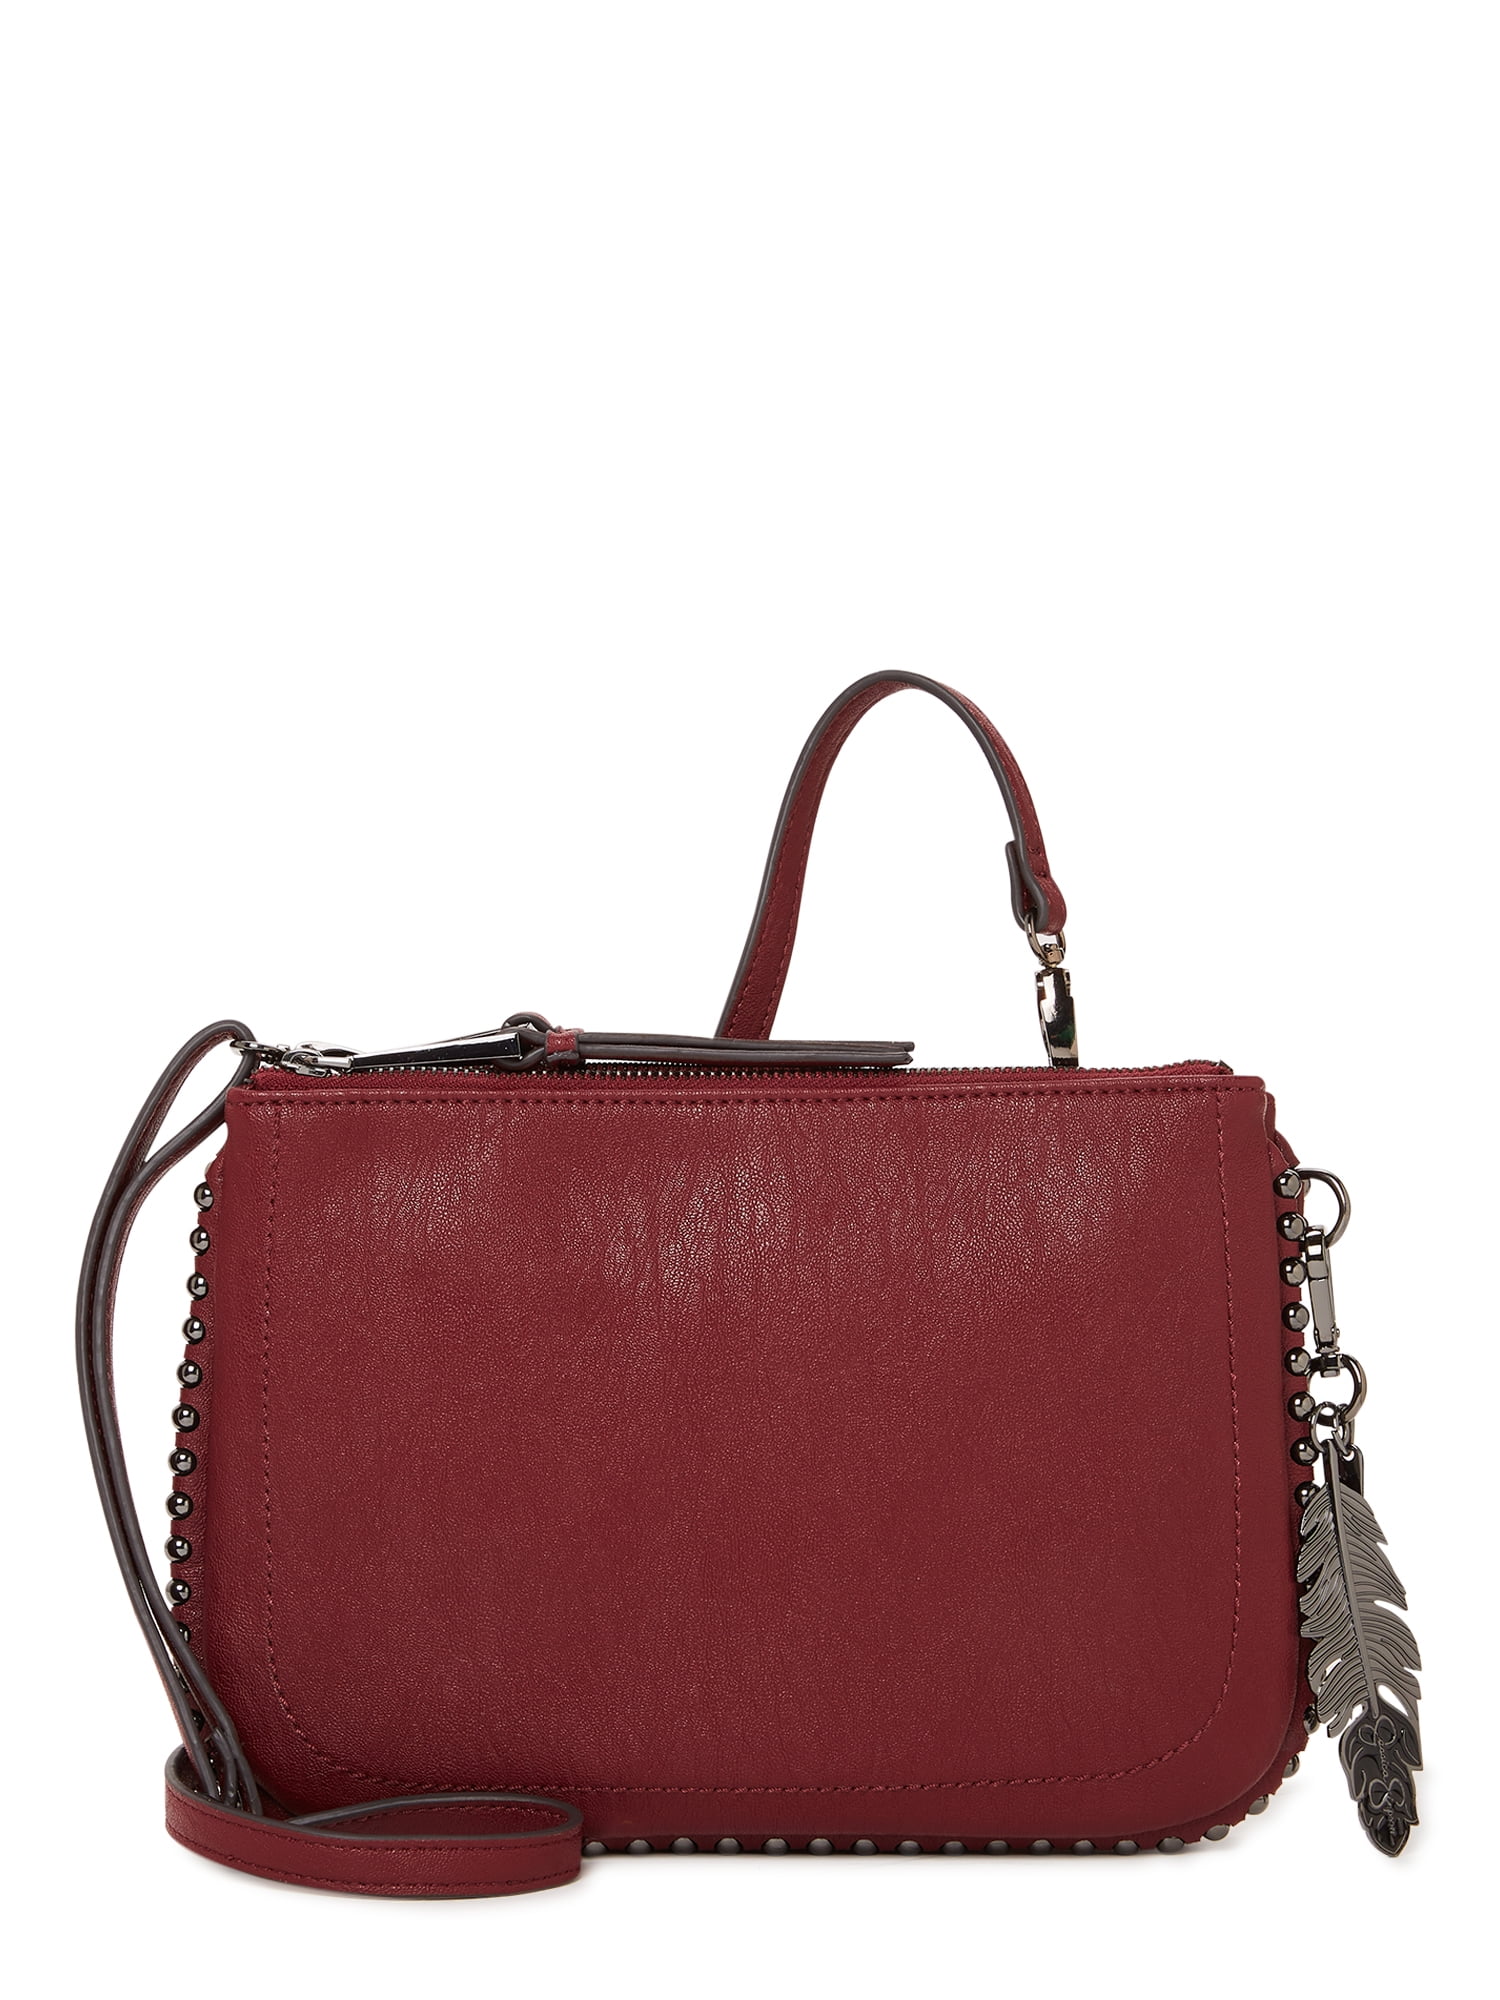 Jessica Simpson Women's Adult Camille Crossbody Bag Port Red 